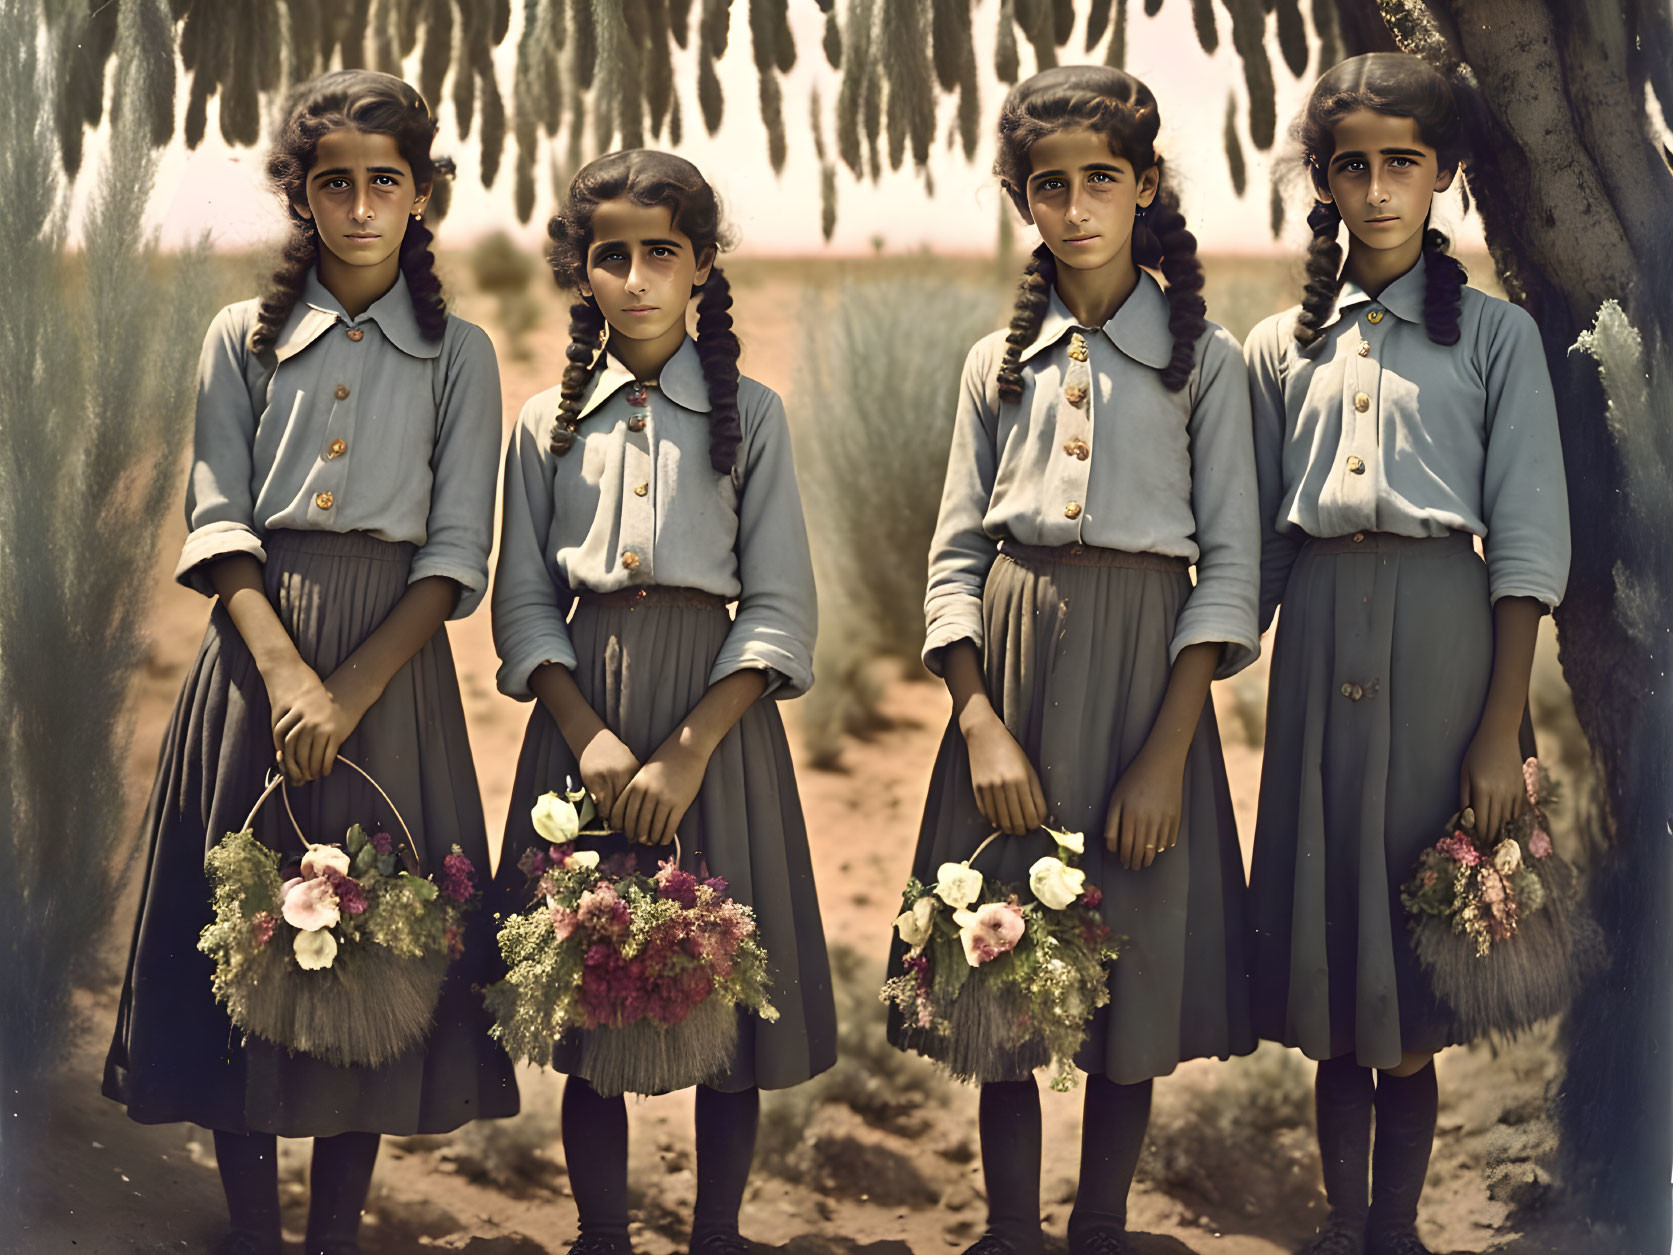 Vintage Attired Girls Holding Flower Bouquets Outdoors